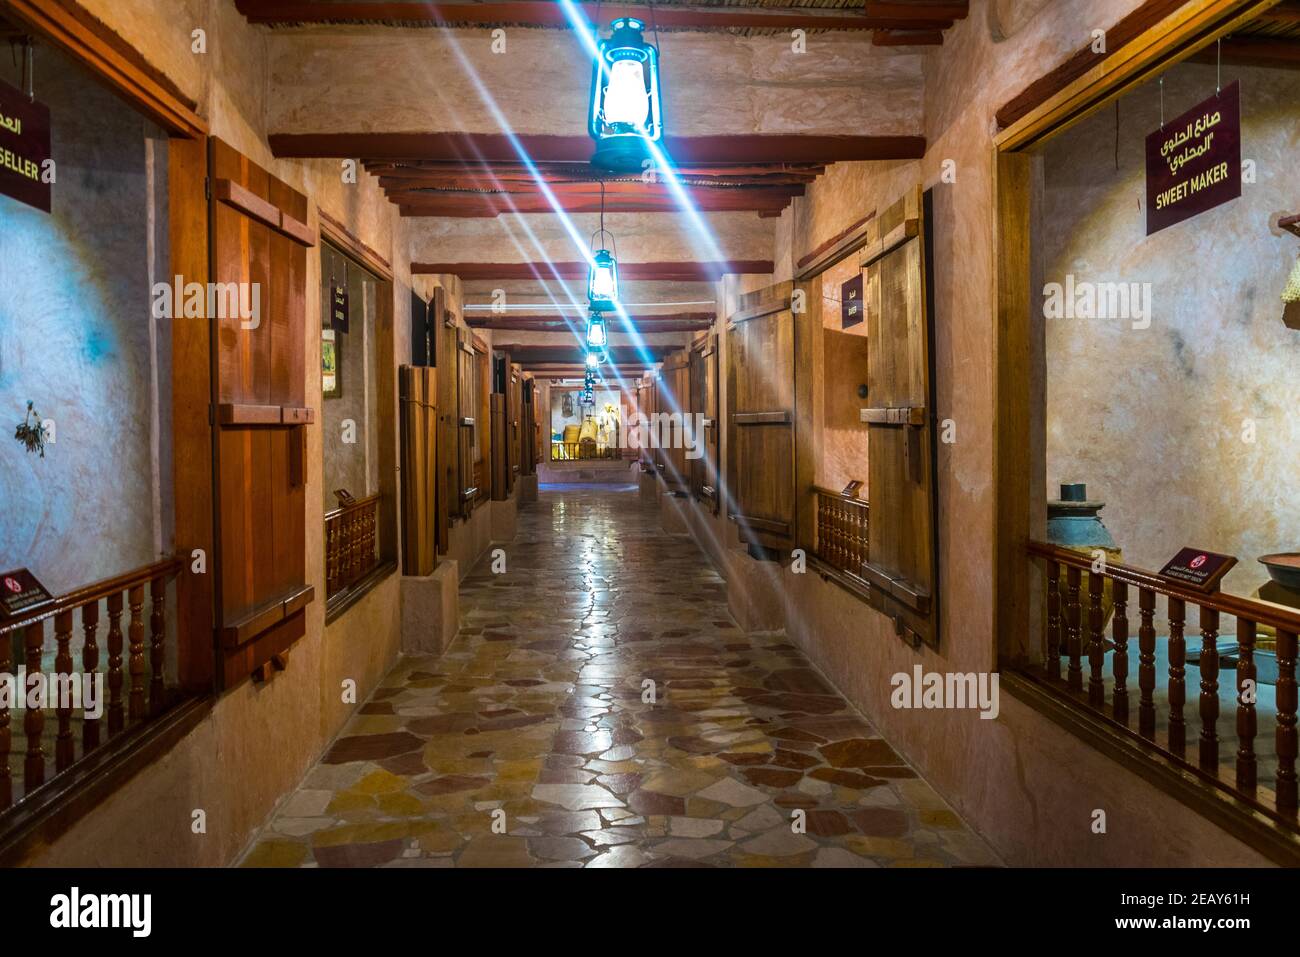 AJMAN, UAE, OCTOBER 24, 2016: Interior of the museum of Ajman is situated in an old fortress. Ajman is the smallest of the United Arab Emirates. Stock Photo